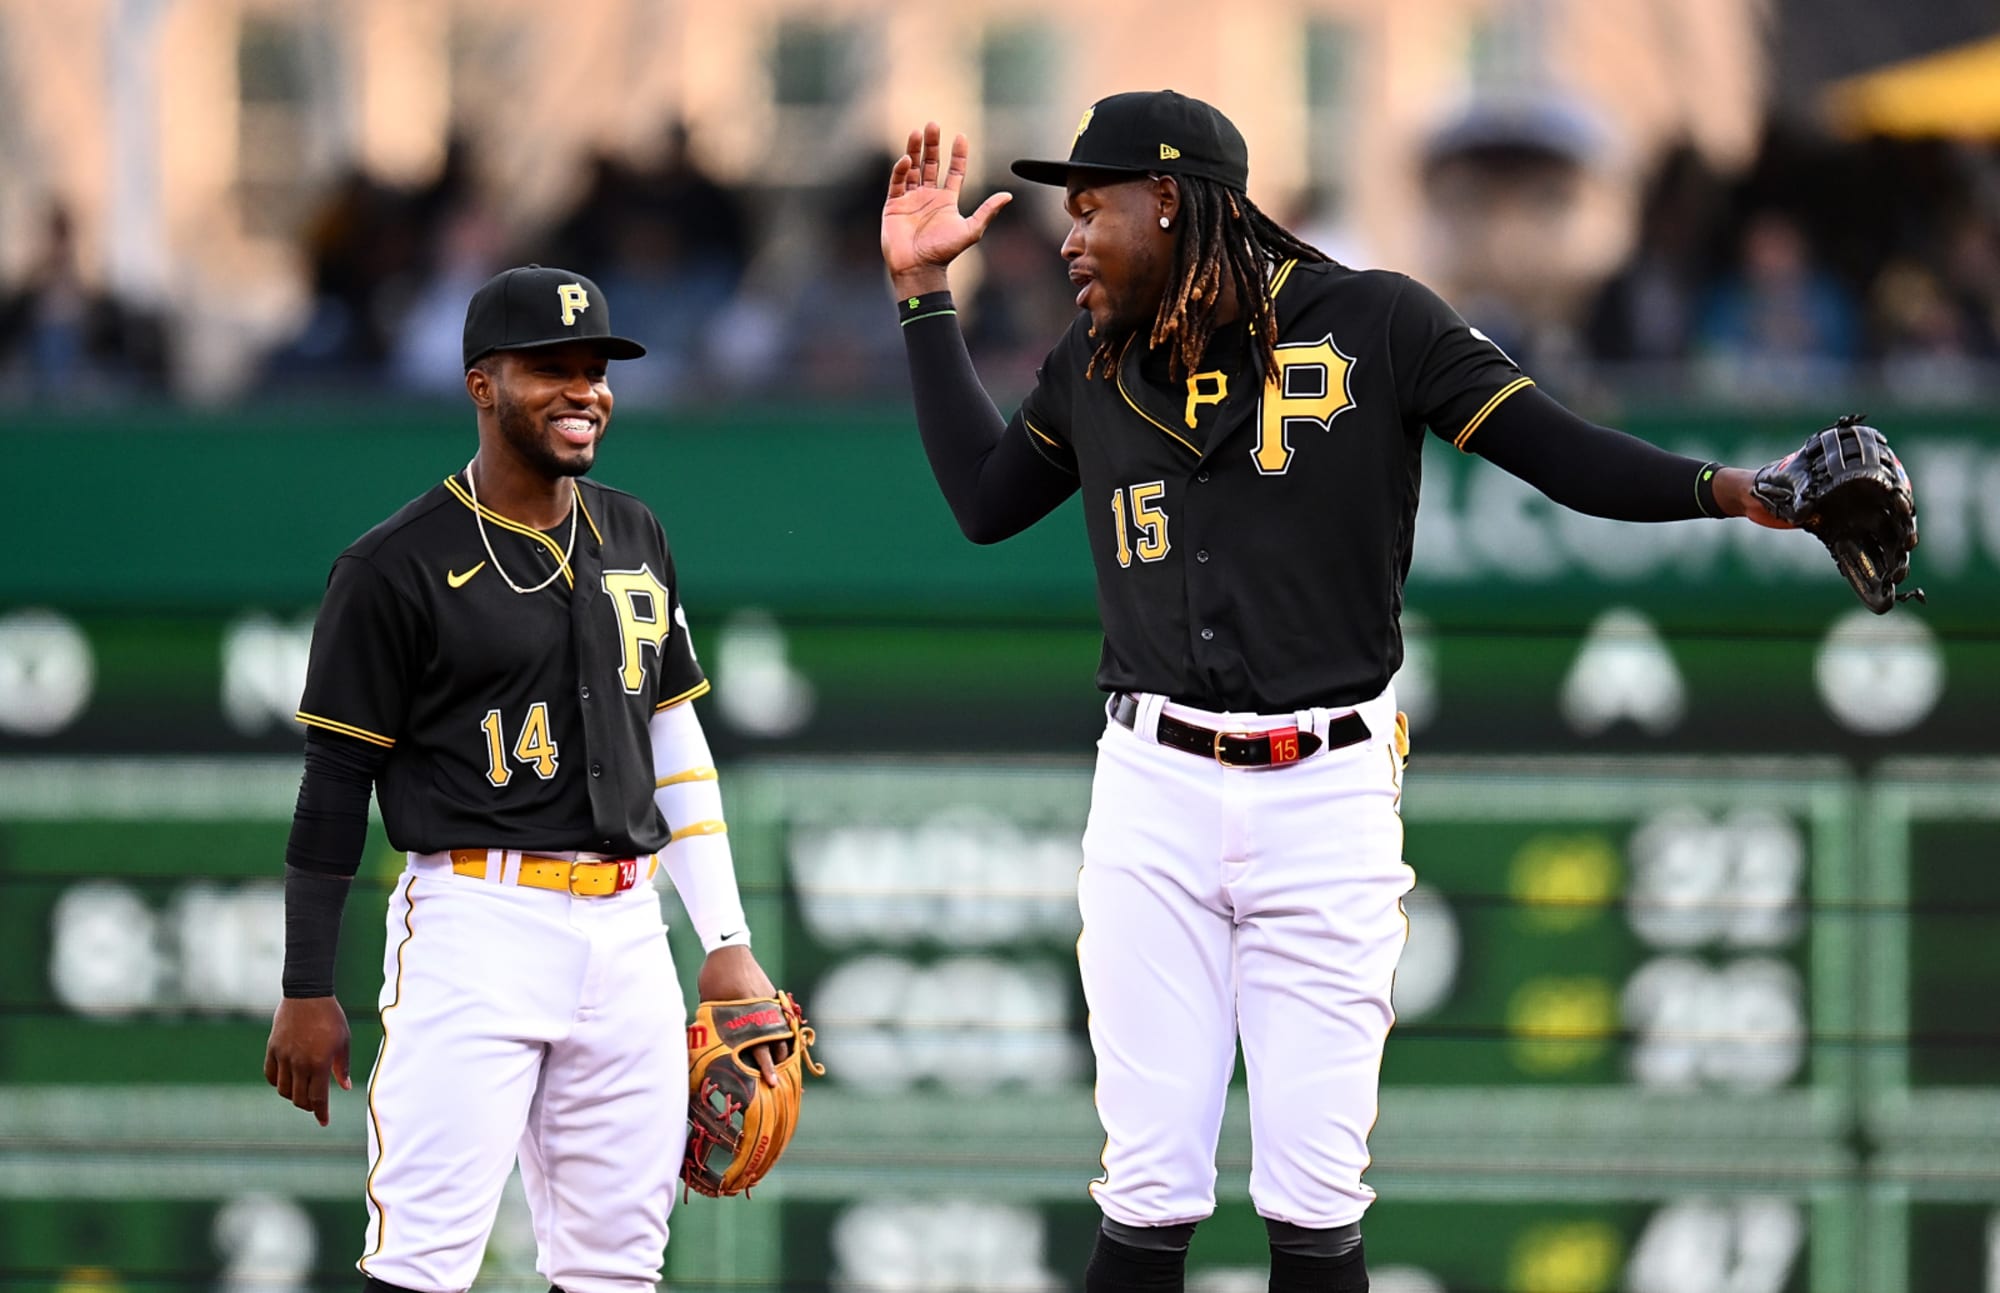 5 fantasy baseball waiver wire replacements for Pirates SS Oneil Cruz -  Page 2